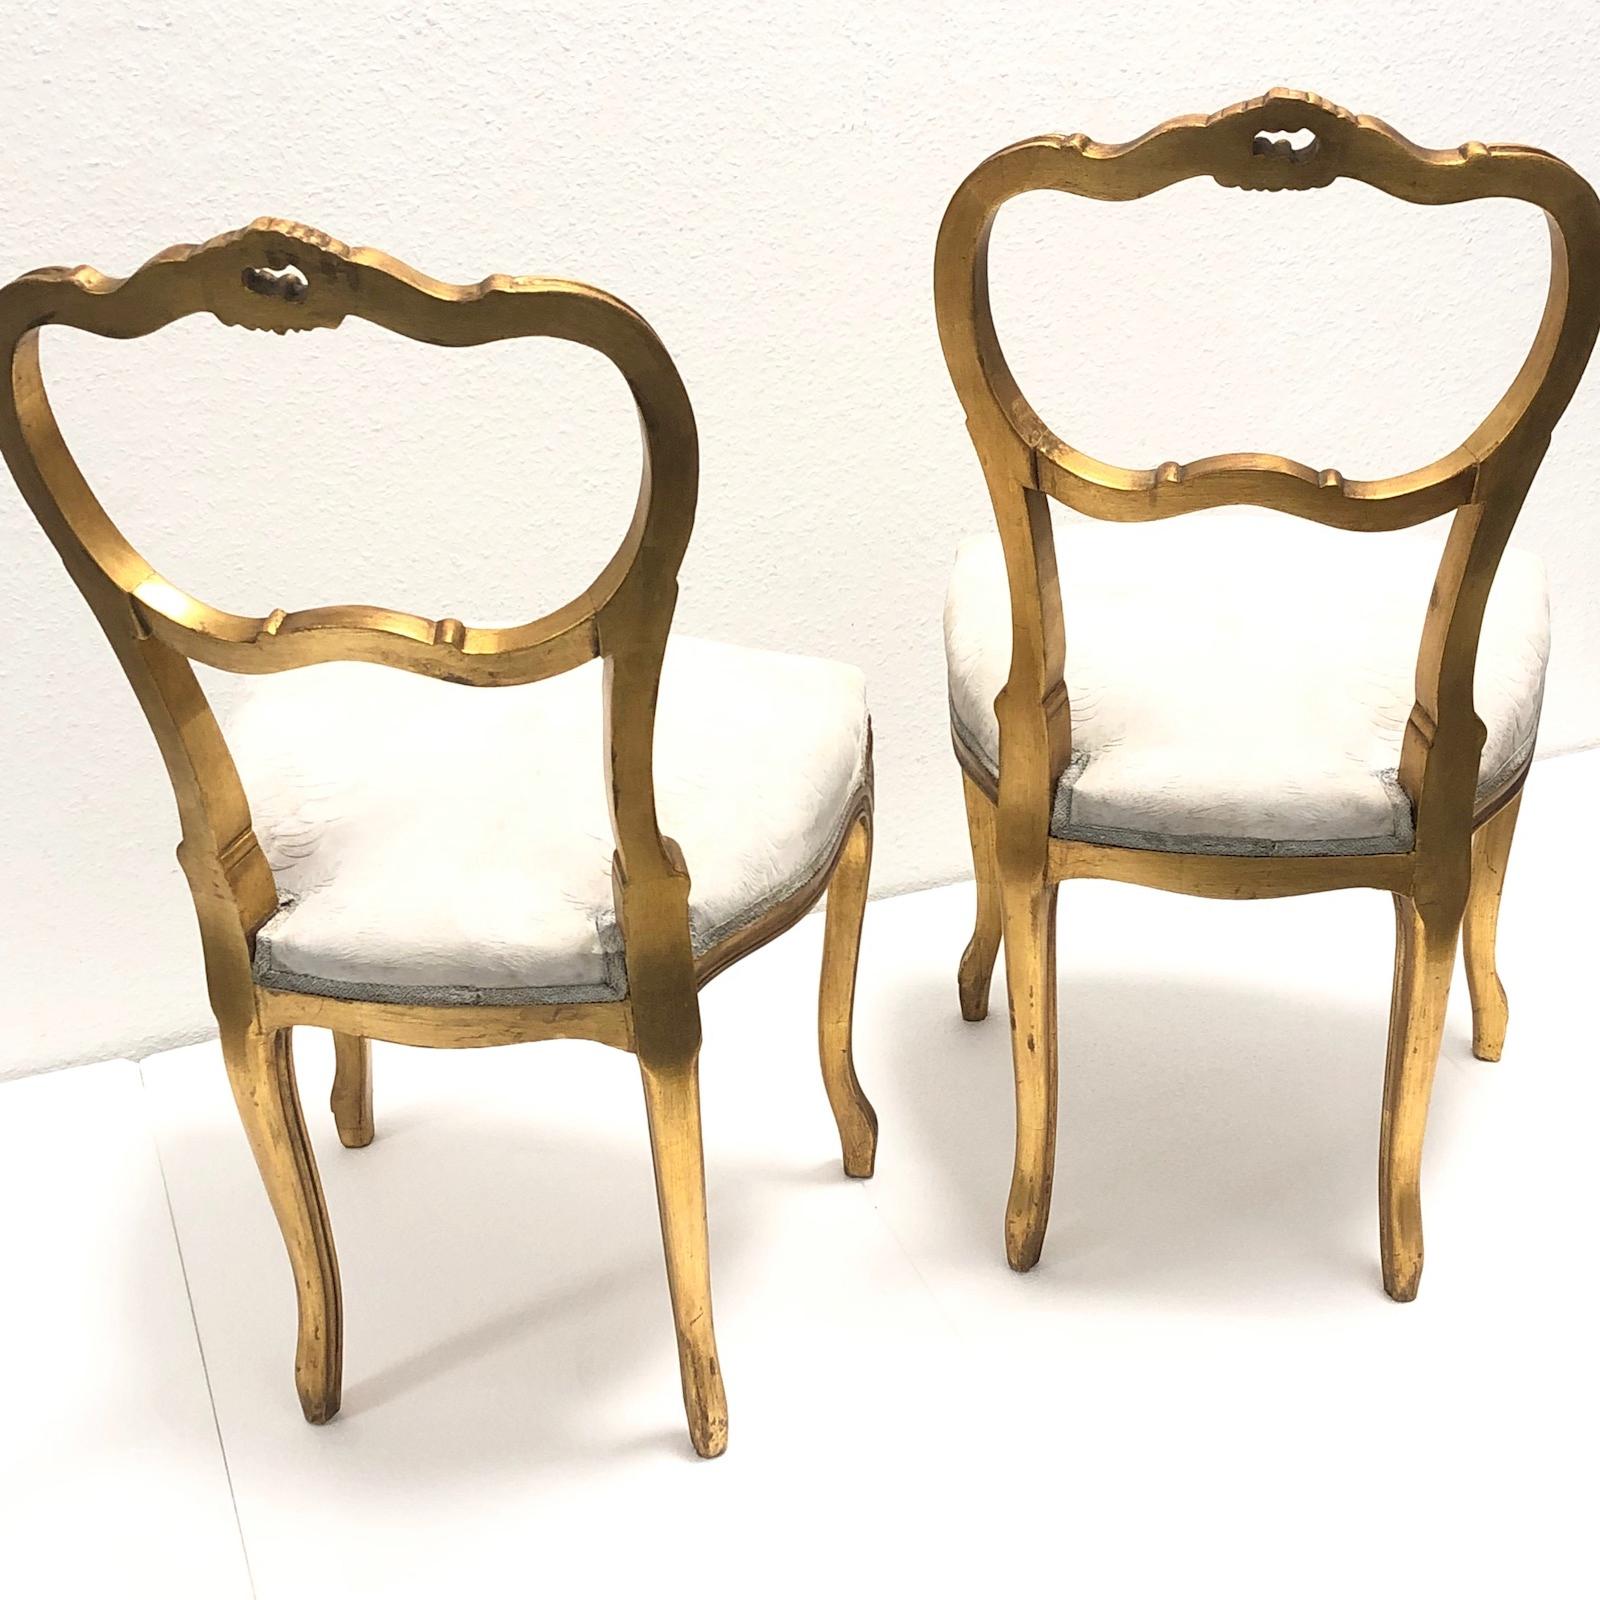 Pair of Giltwood Chairs, Shabby Chic Swedish Antique Farmhouse Style, 1920s In Good Condition For Sale In Nuernberg, DE